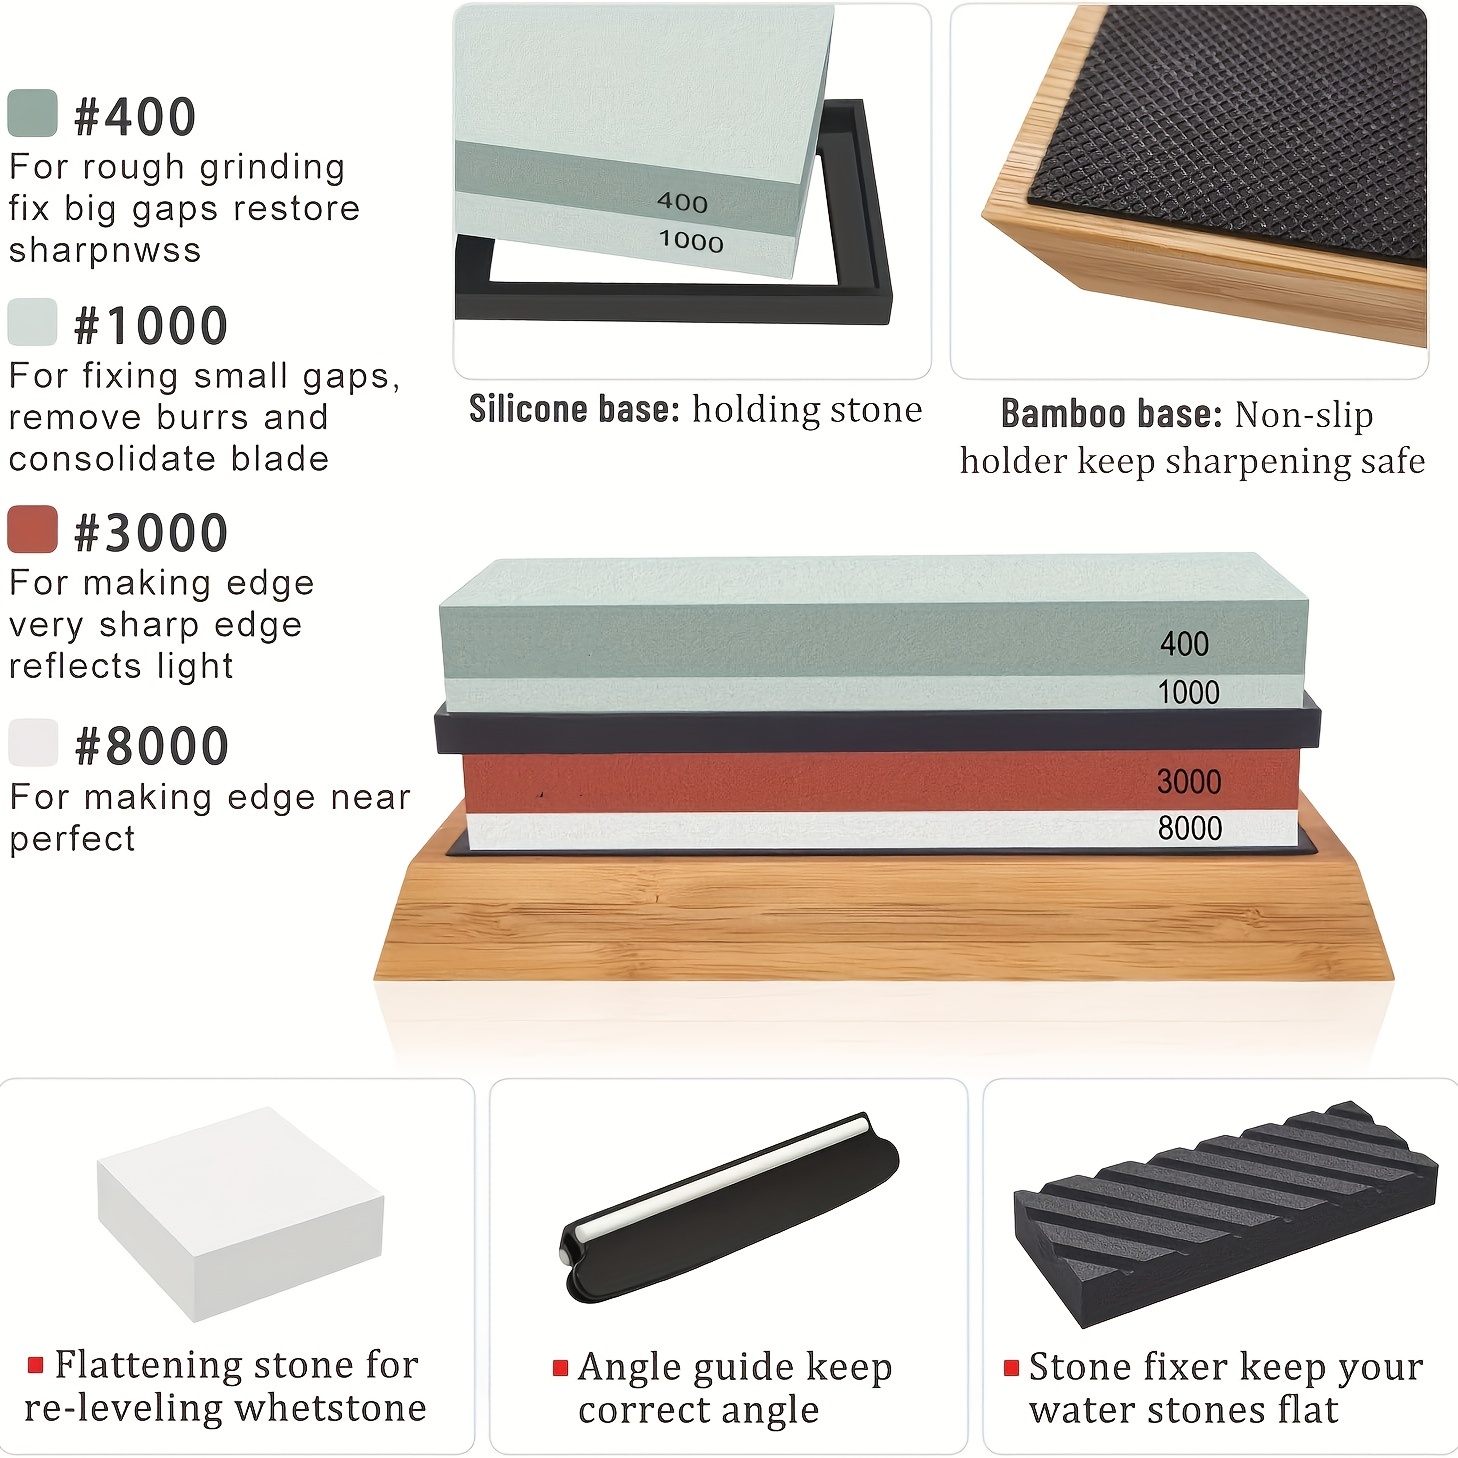 Sharp Pebble Extra Large Sharpening Stones Set - Grits 400/1000/6000 - With  NonSlip Bamboo Base, Flattening Stone and Angle Guide